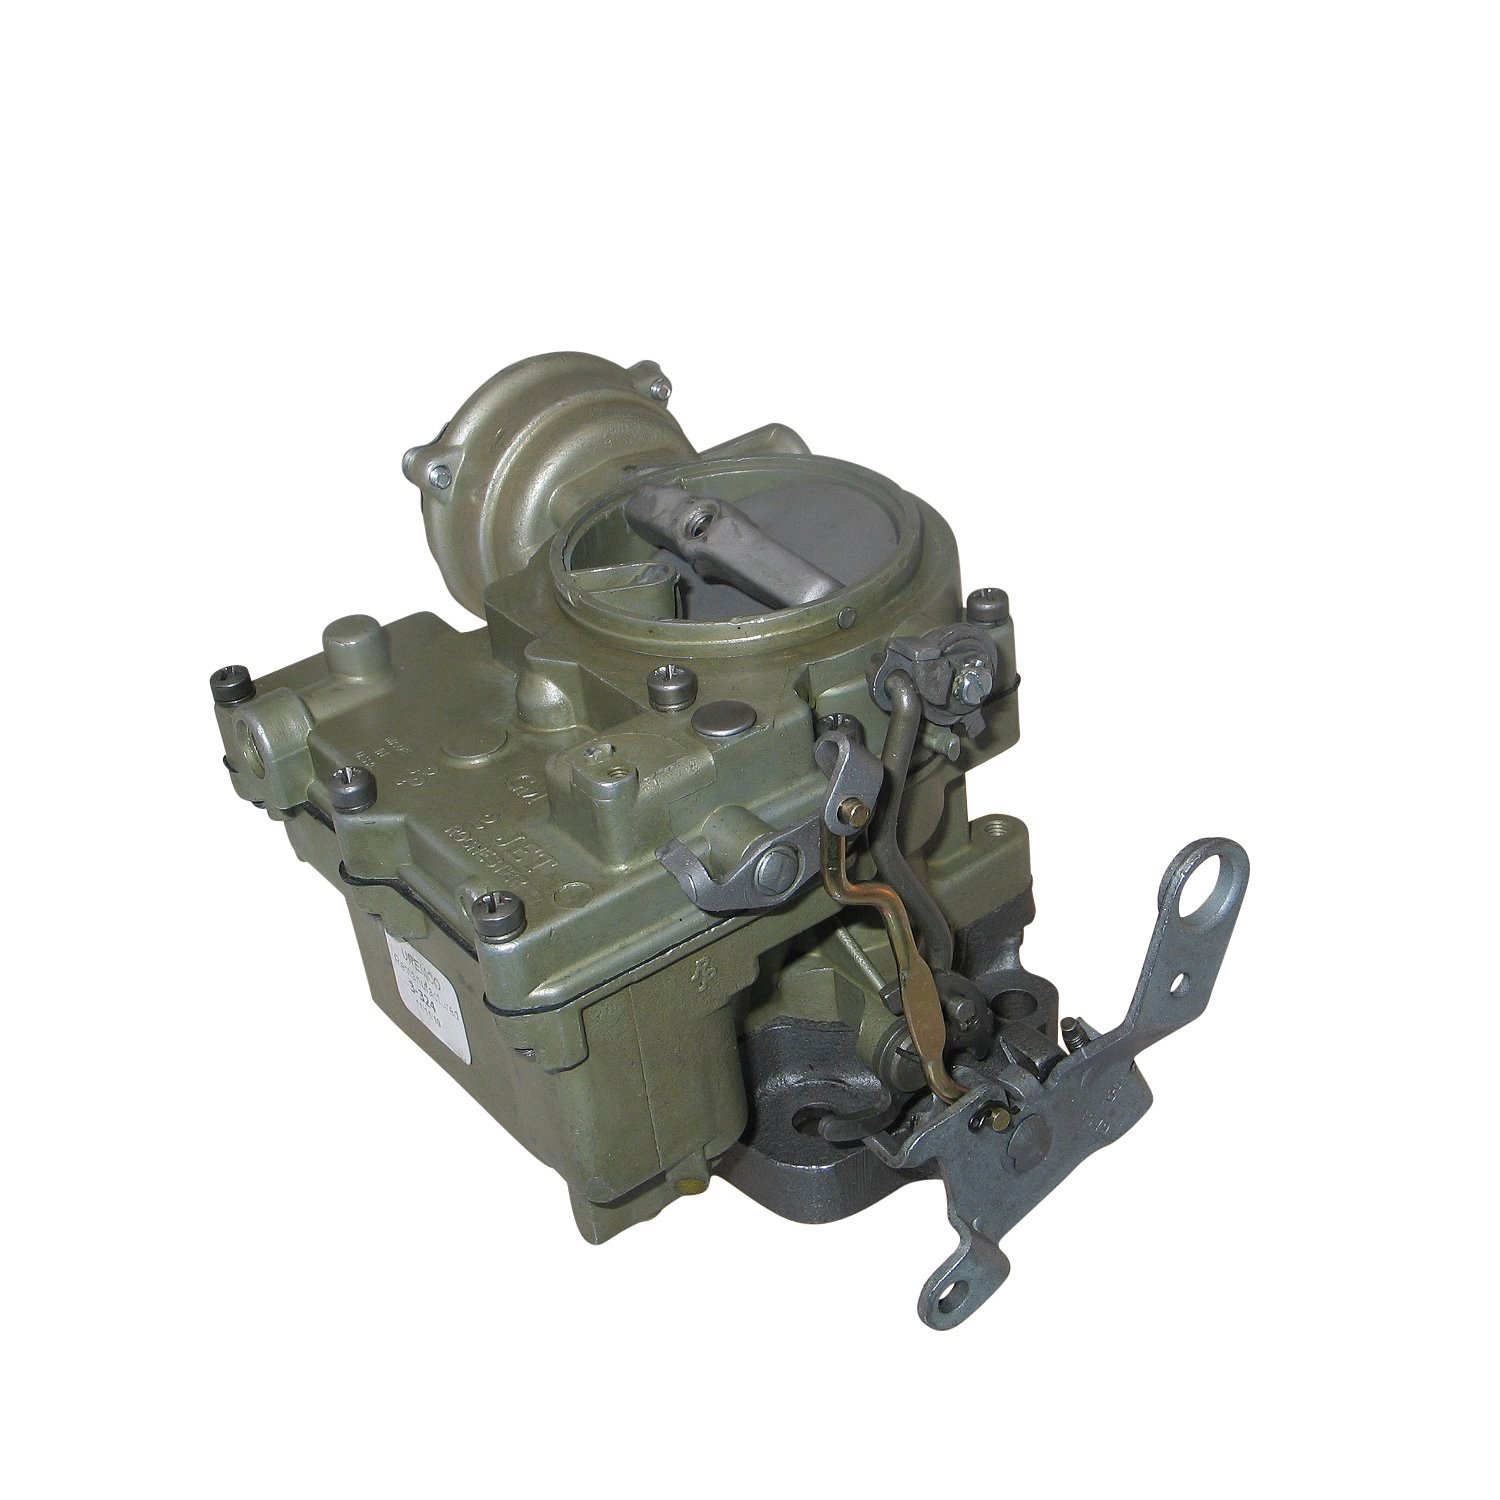 3-322 Rochester Remanufactured Carburetor, 2GC-Style